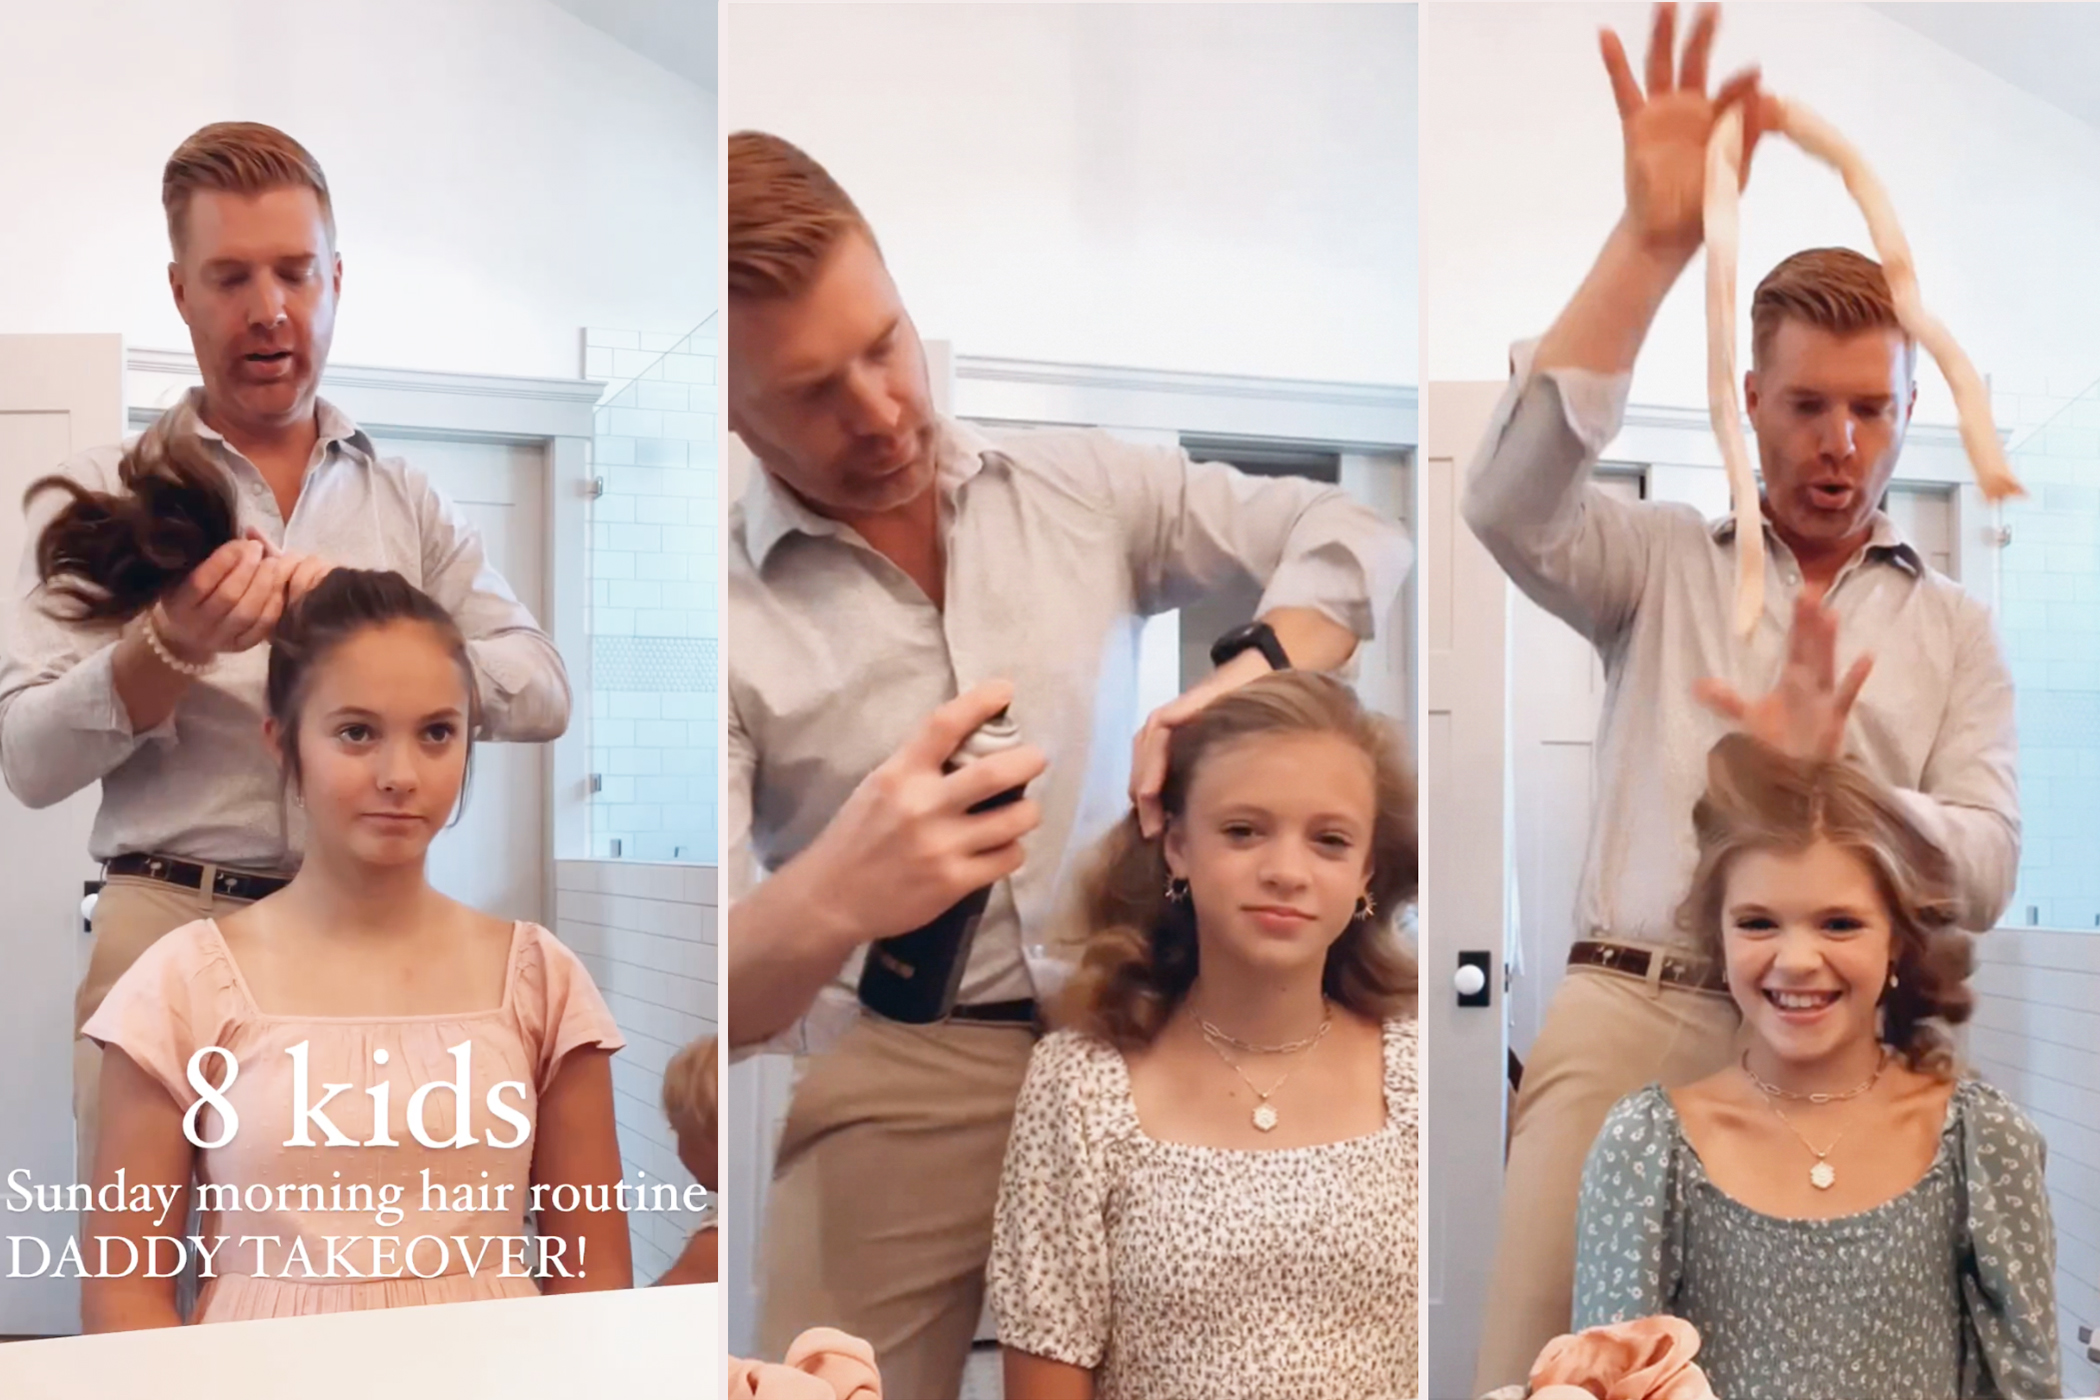 Wife Films Husband Styling 8 Kids' Hair for Sunday Church, Says 'More Present Fathers' Can Make Our World Different